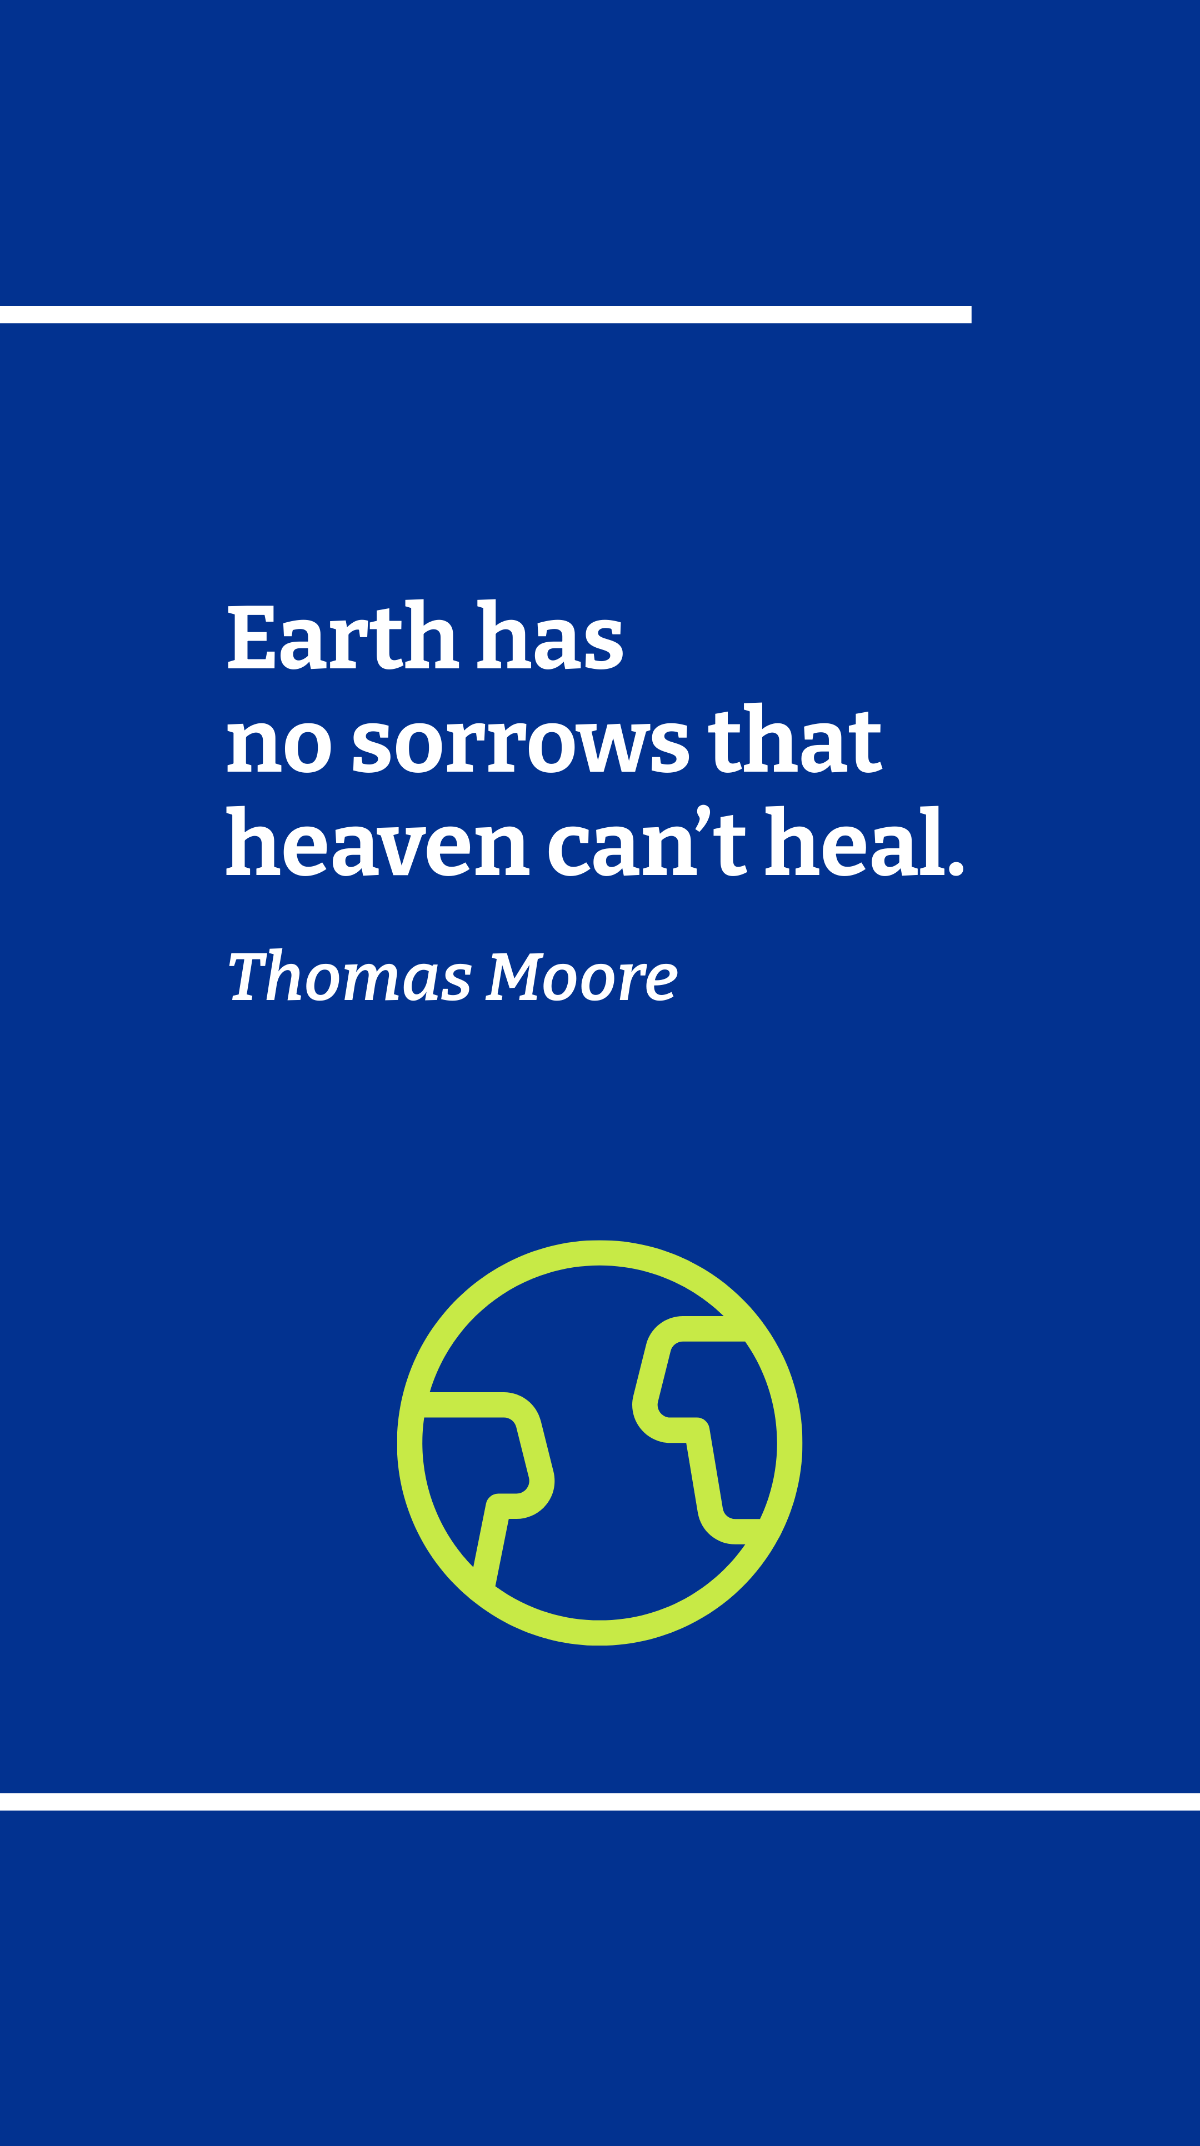 Free Thomas Moore - Earth has no sorrows that heaven can’t heal. Template